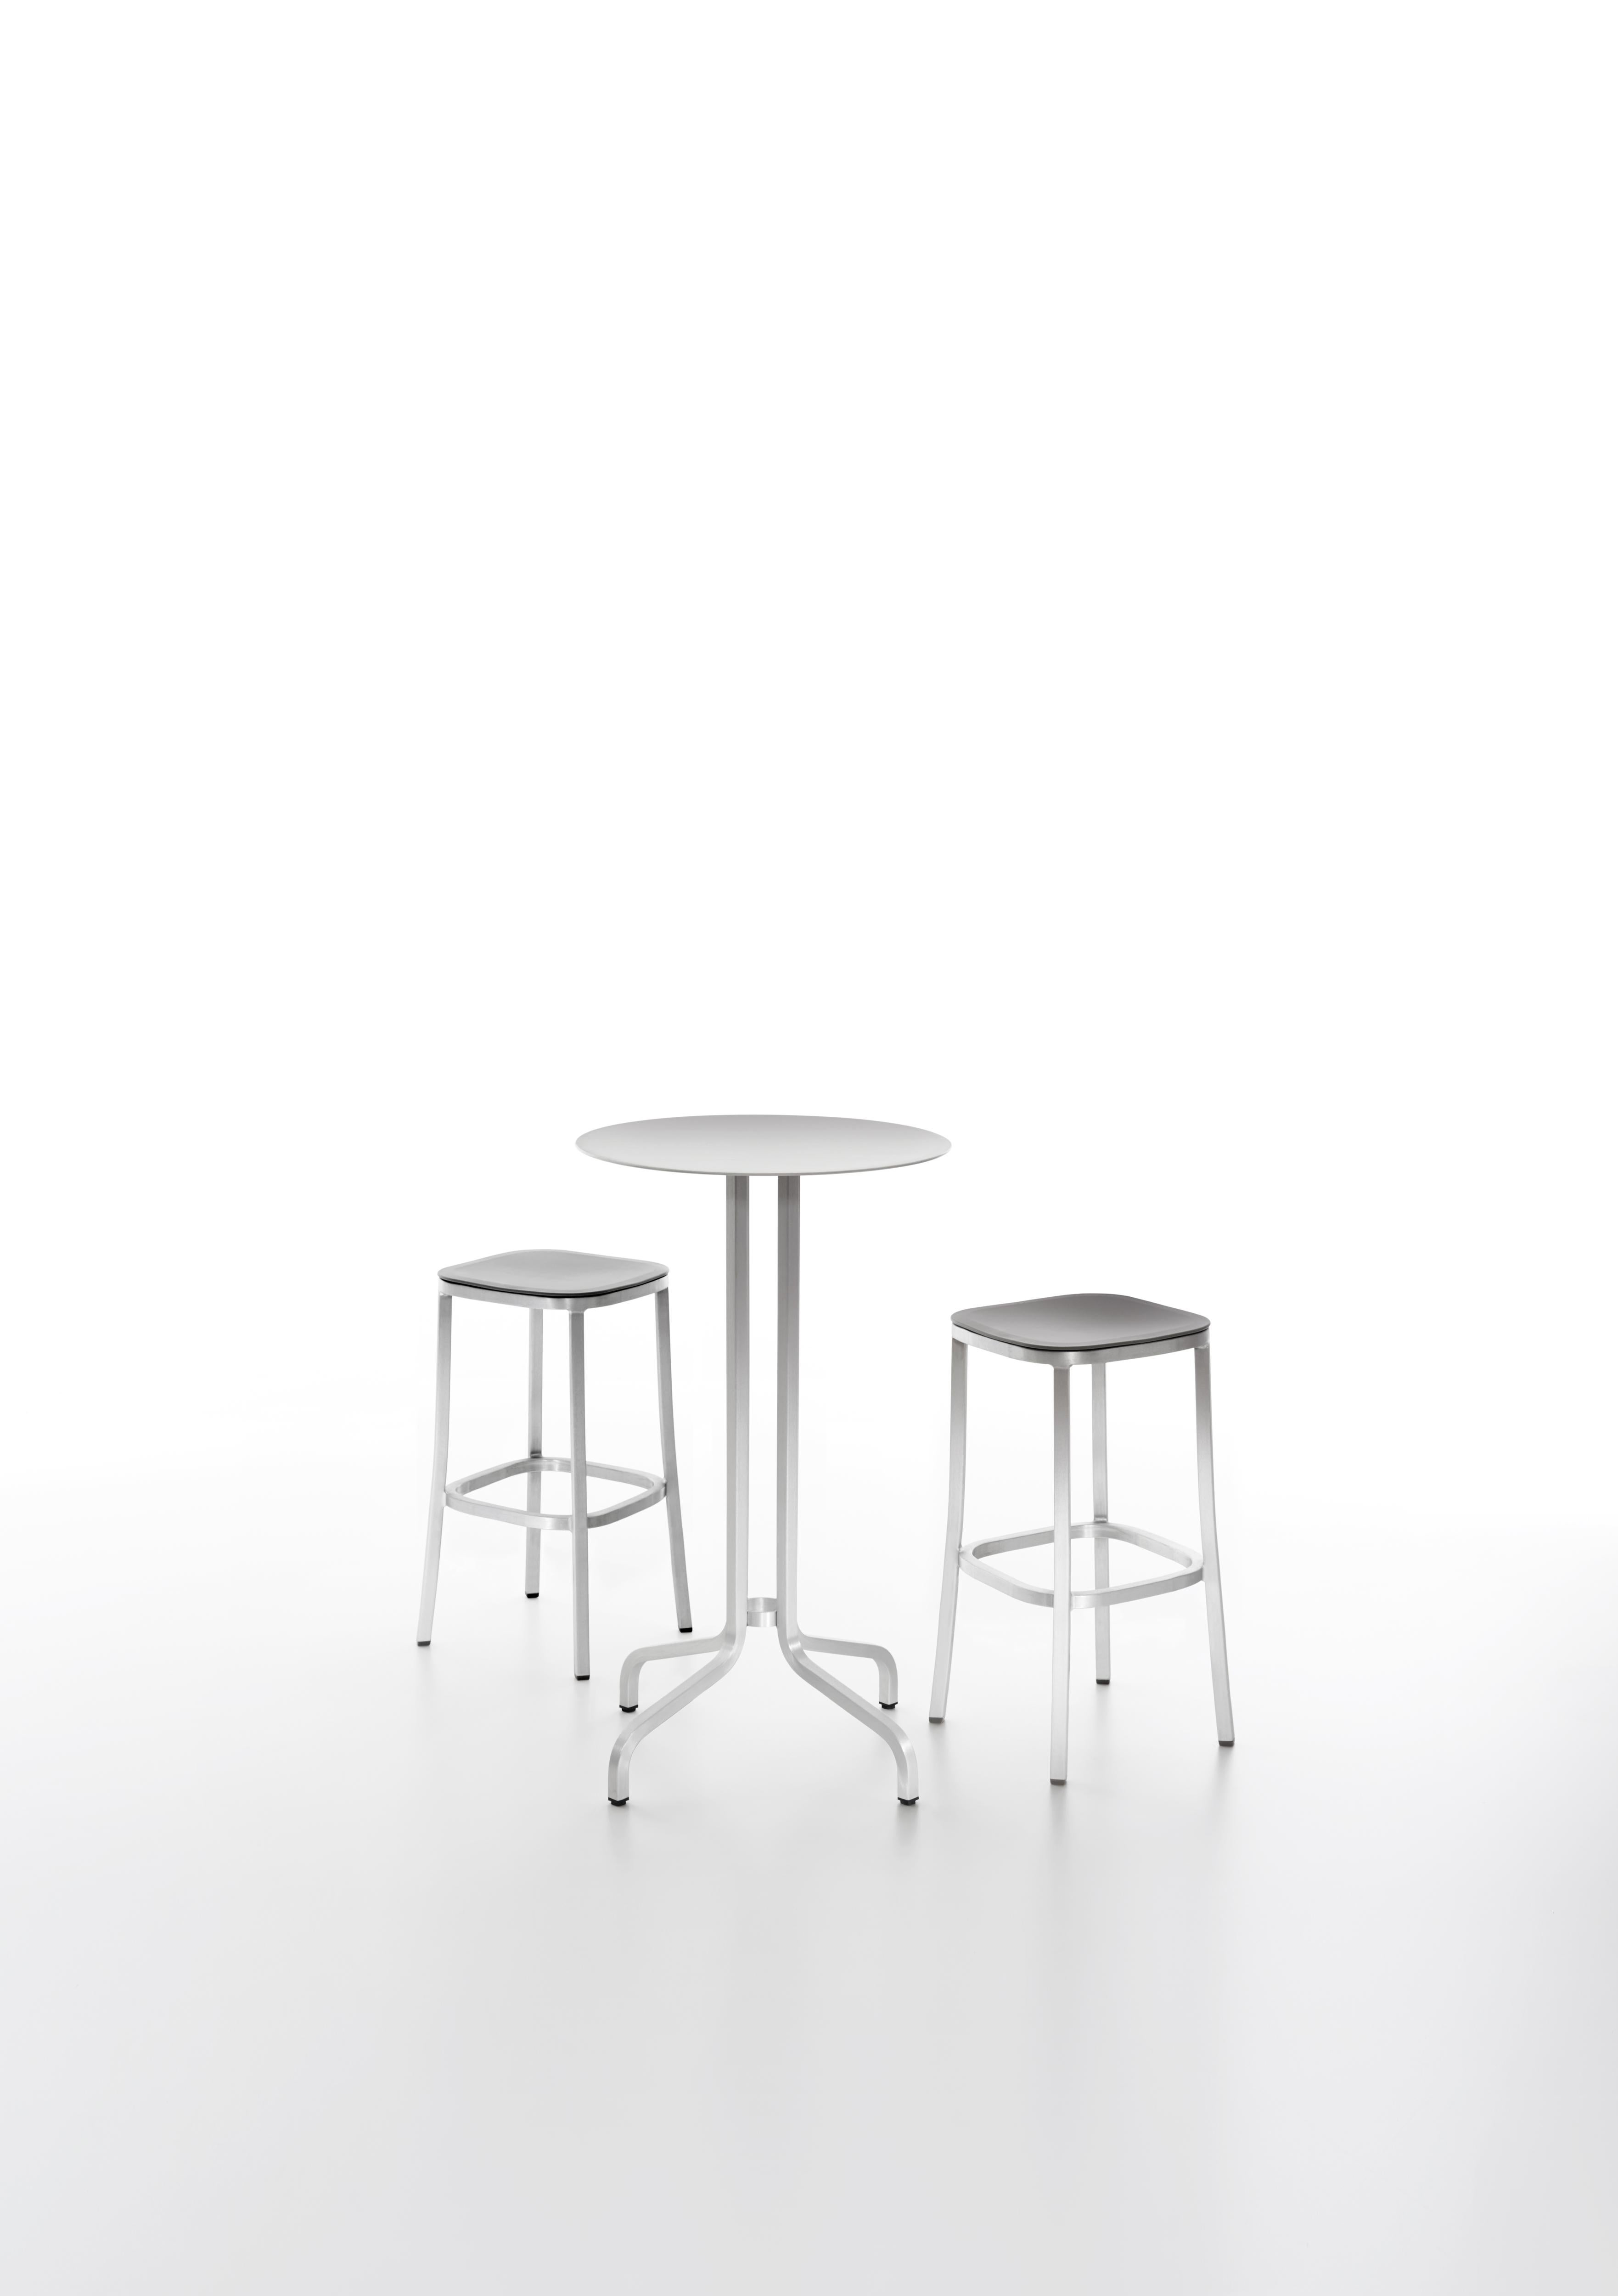 Emeco 1 Inch Barstool in Brushed Aluminum and Bordeaux by Jasper Morrison In New Condition For Sale In Hanover, PA